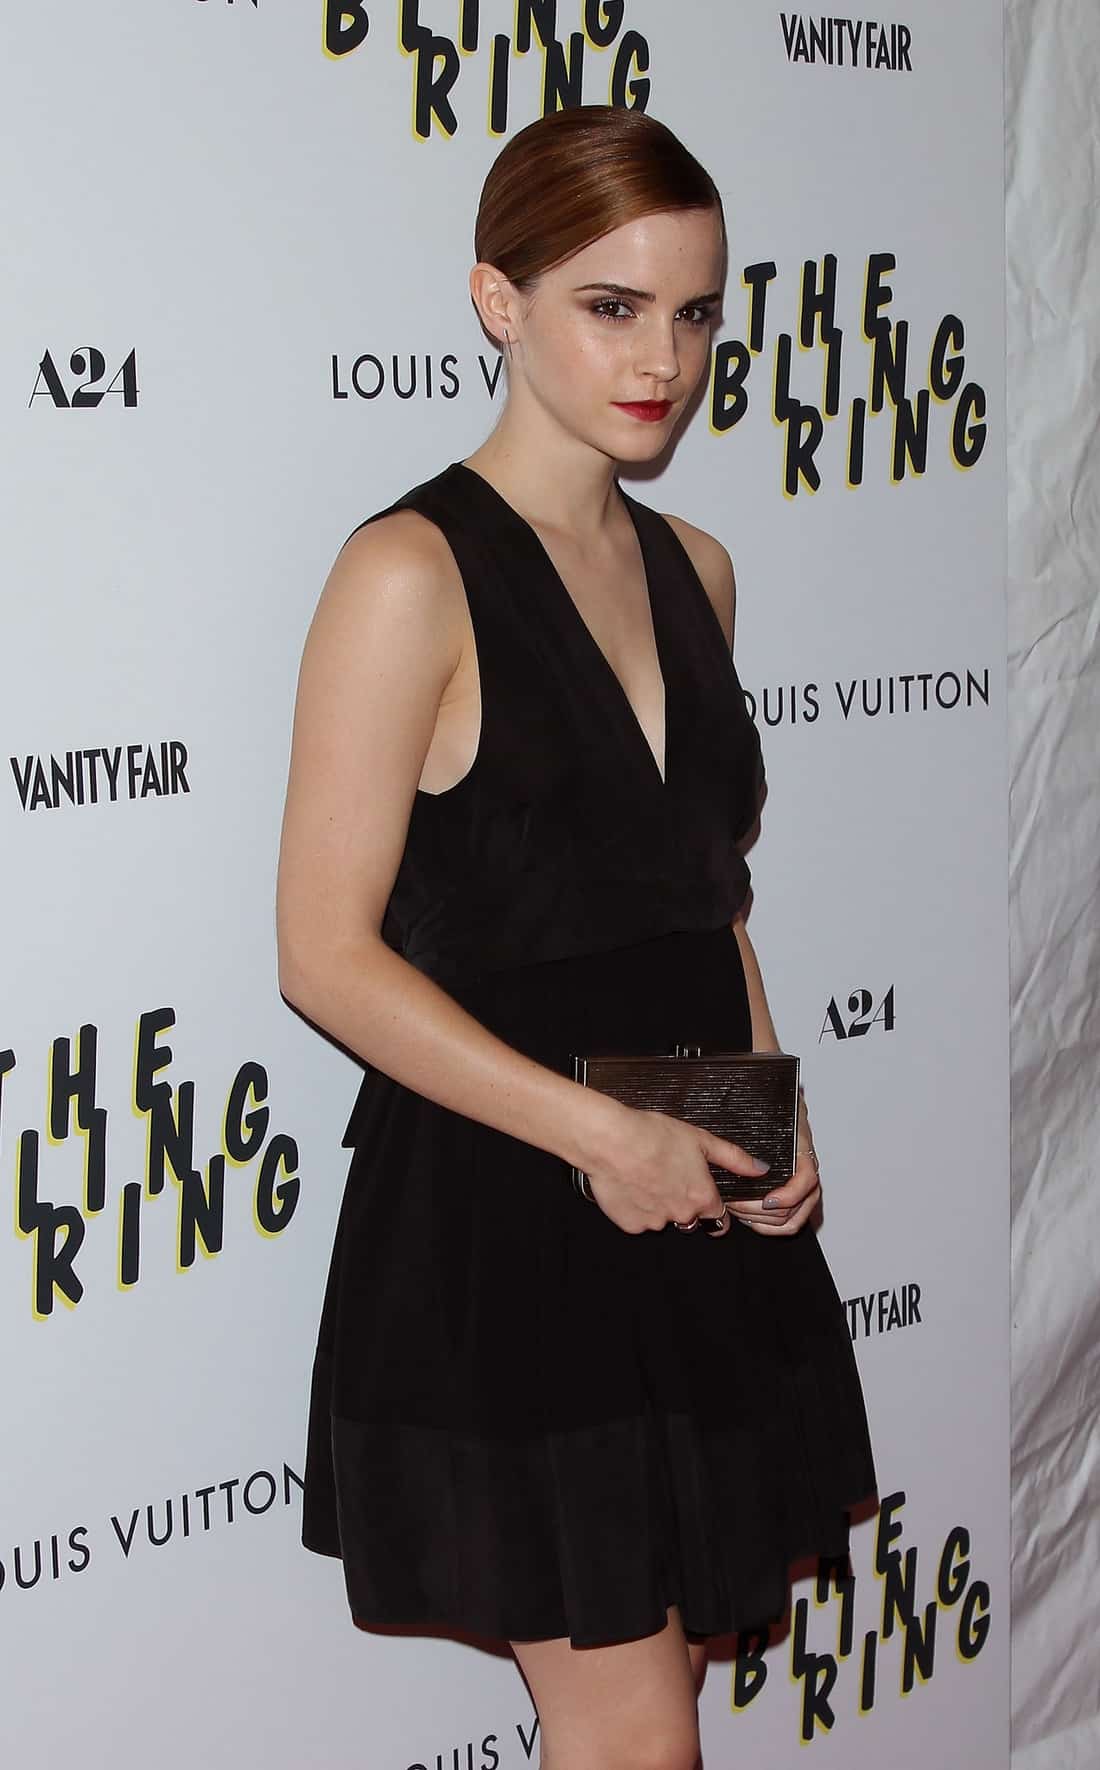 Emma Watson Wore a Daring Black Mini Dress at The Bling Ring Premiere in NY